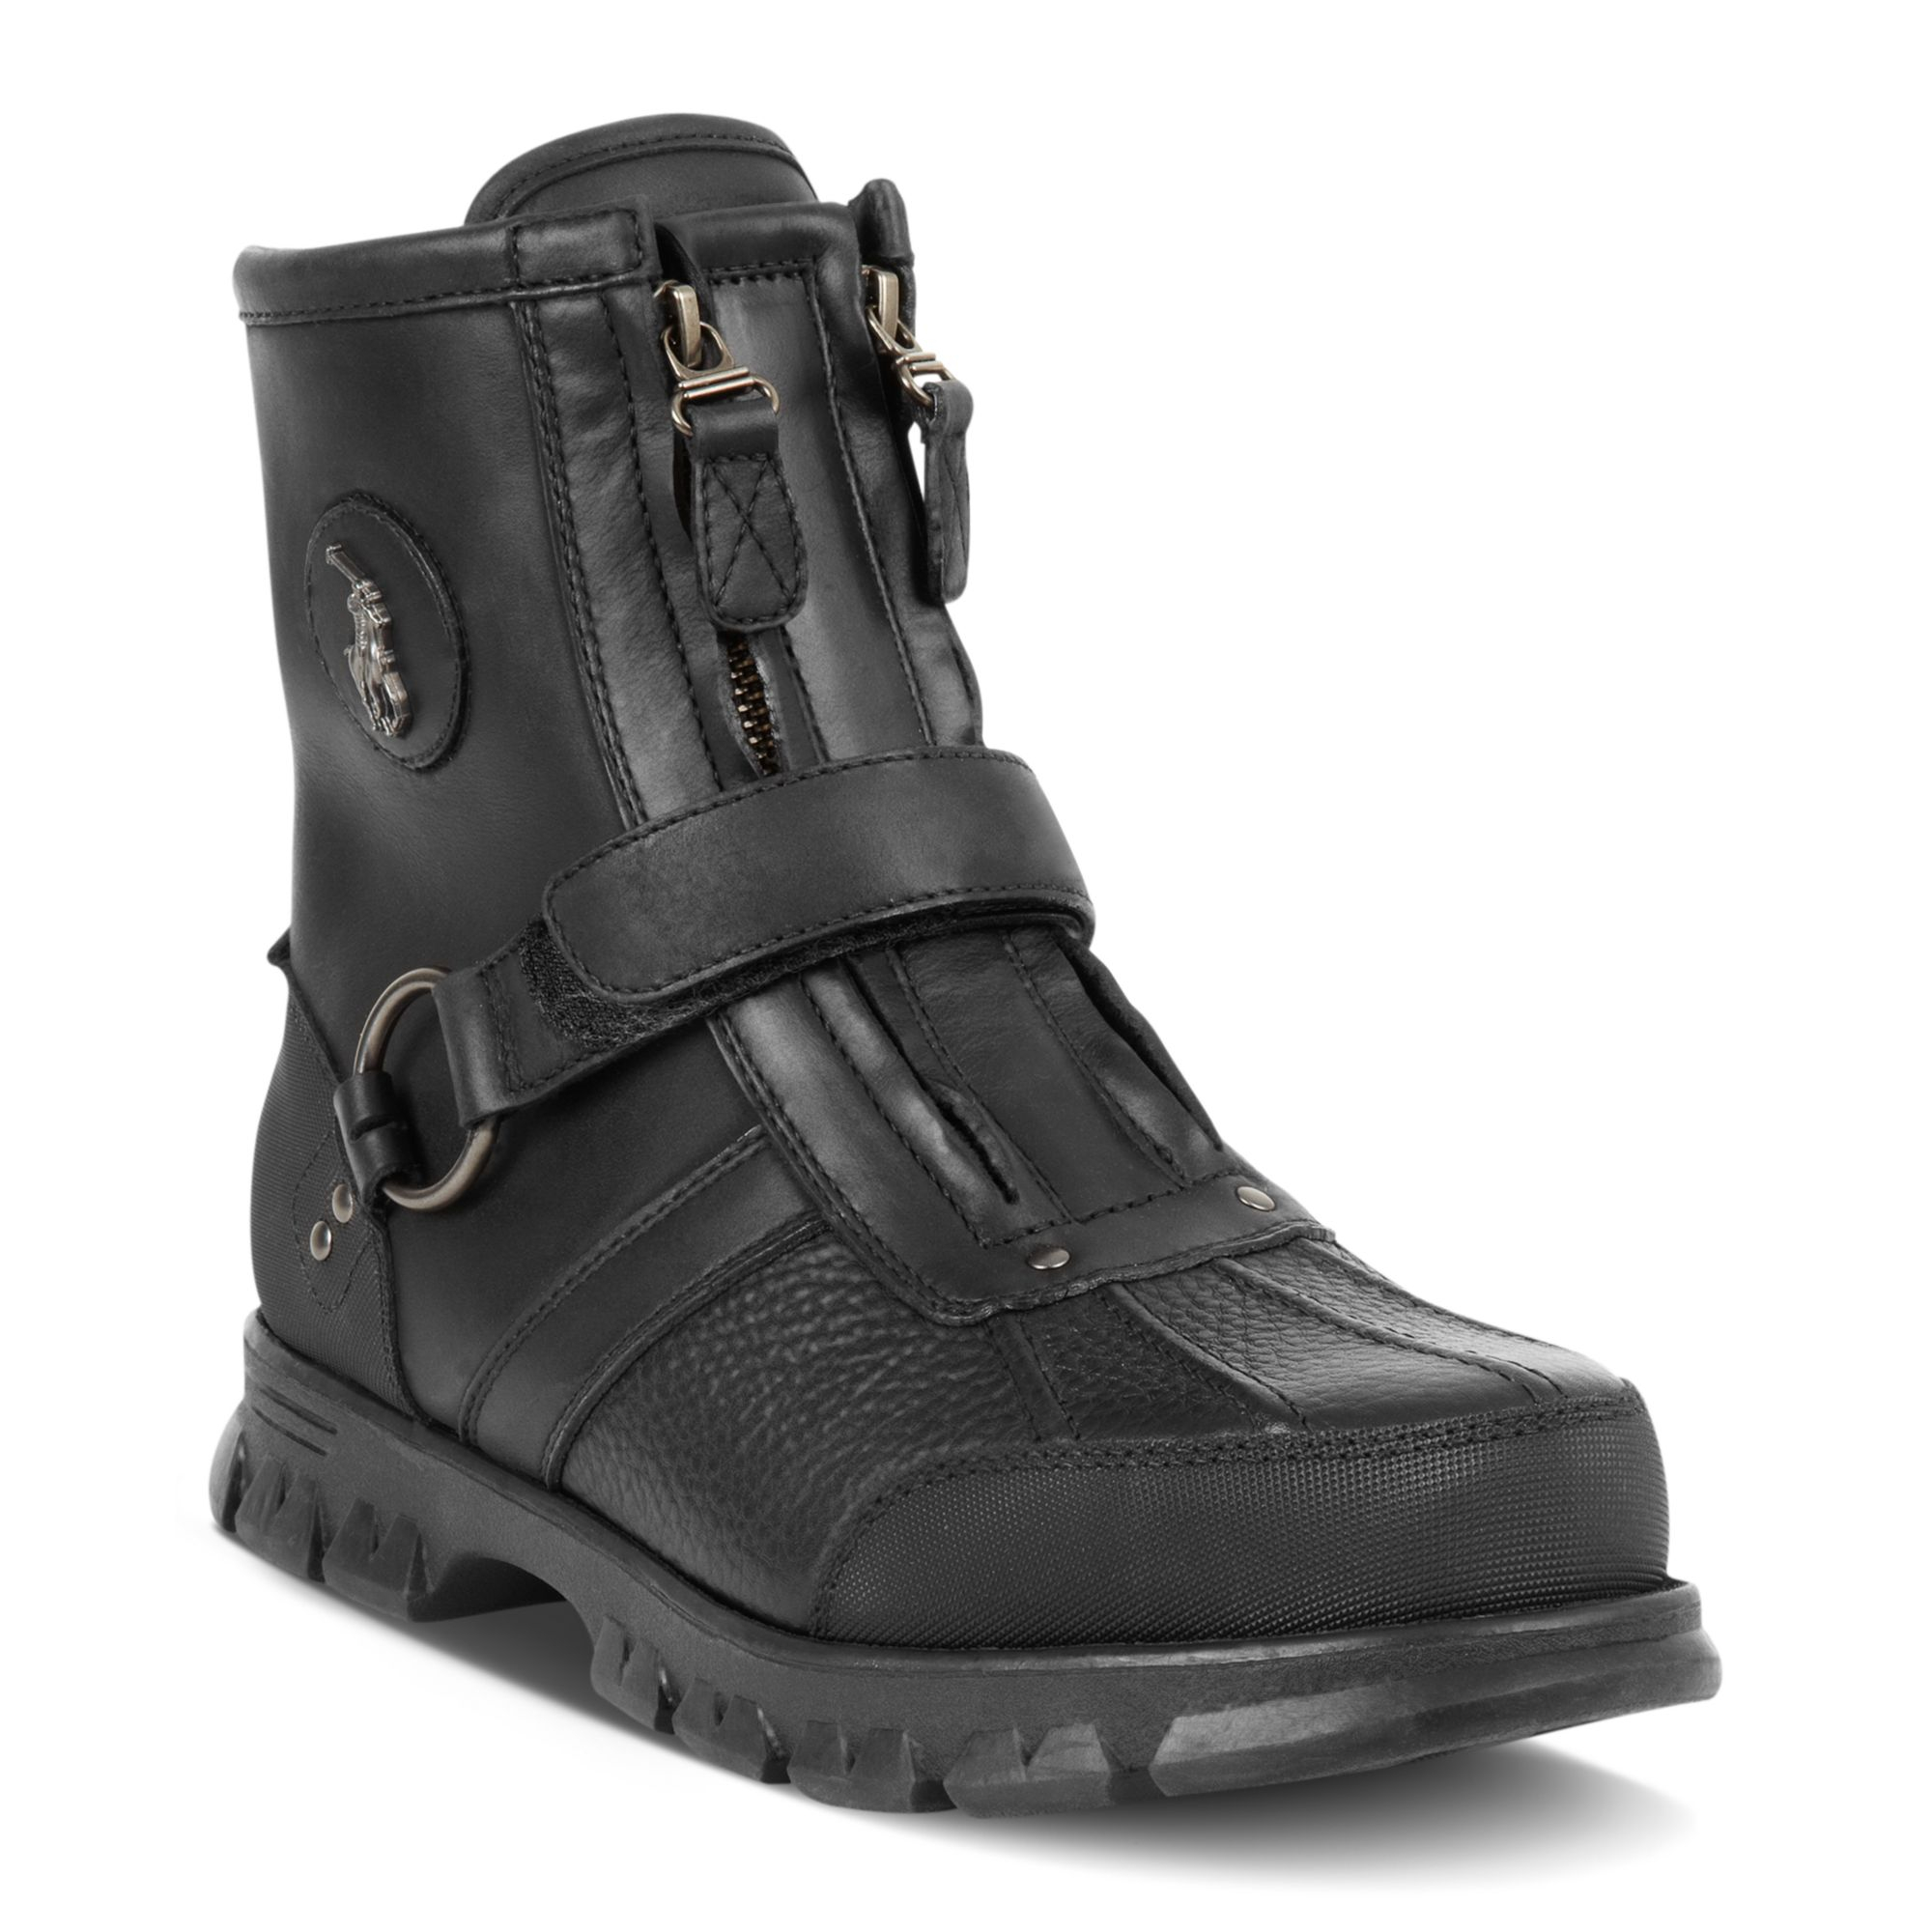 Ralph Lauren Black Polo Conquest Iii High Boots Product 1 4497377 0 814582526 Normal 